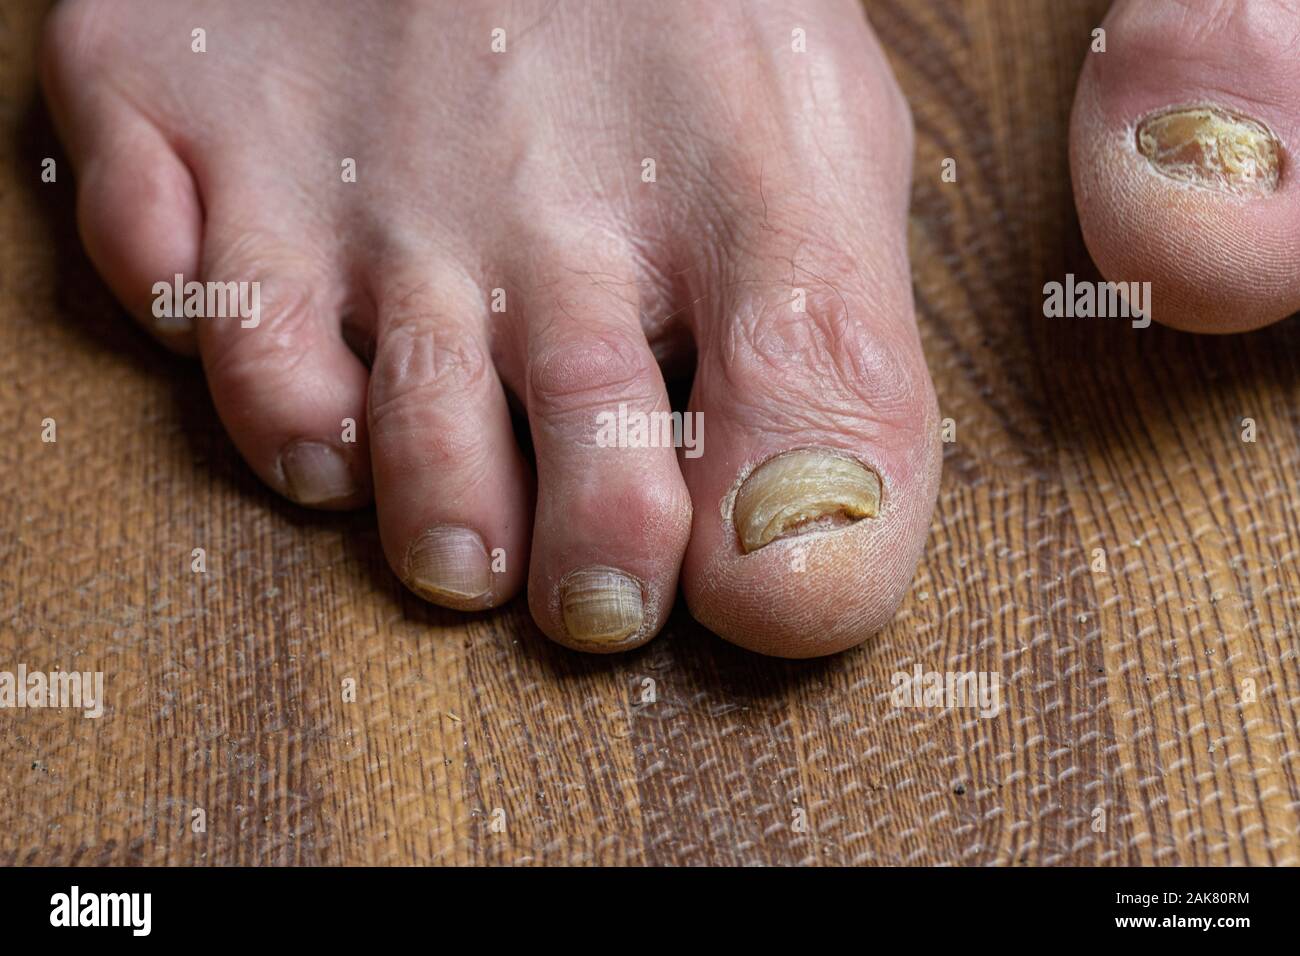 close up of fungus toenails and curled toes affected by Parkinson's Disease Stock Photo